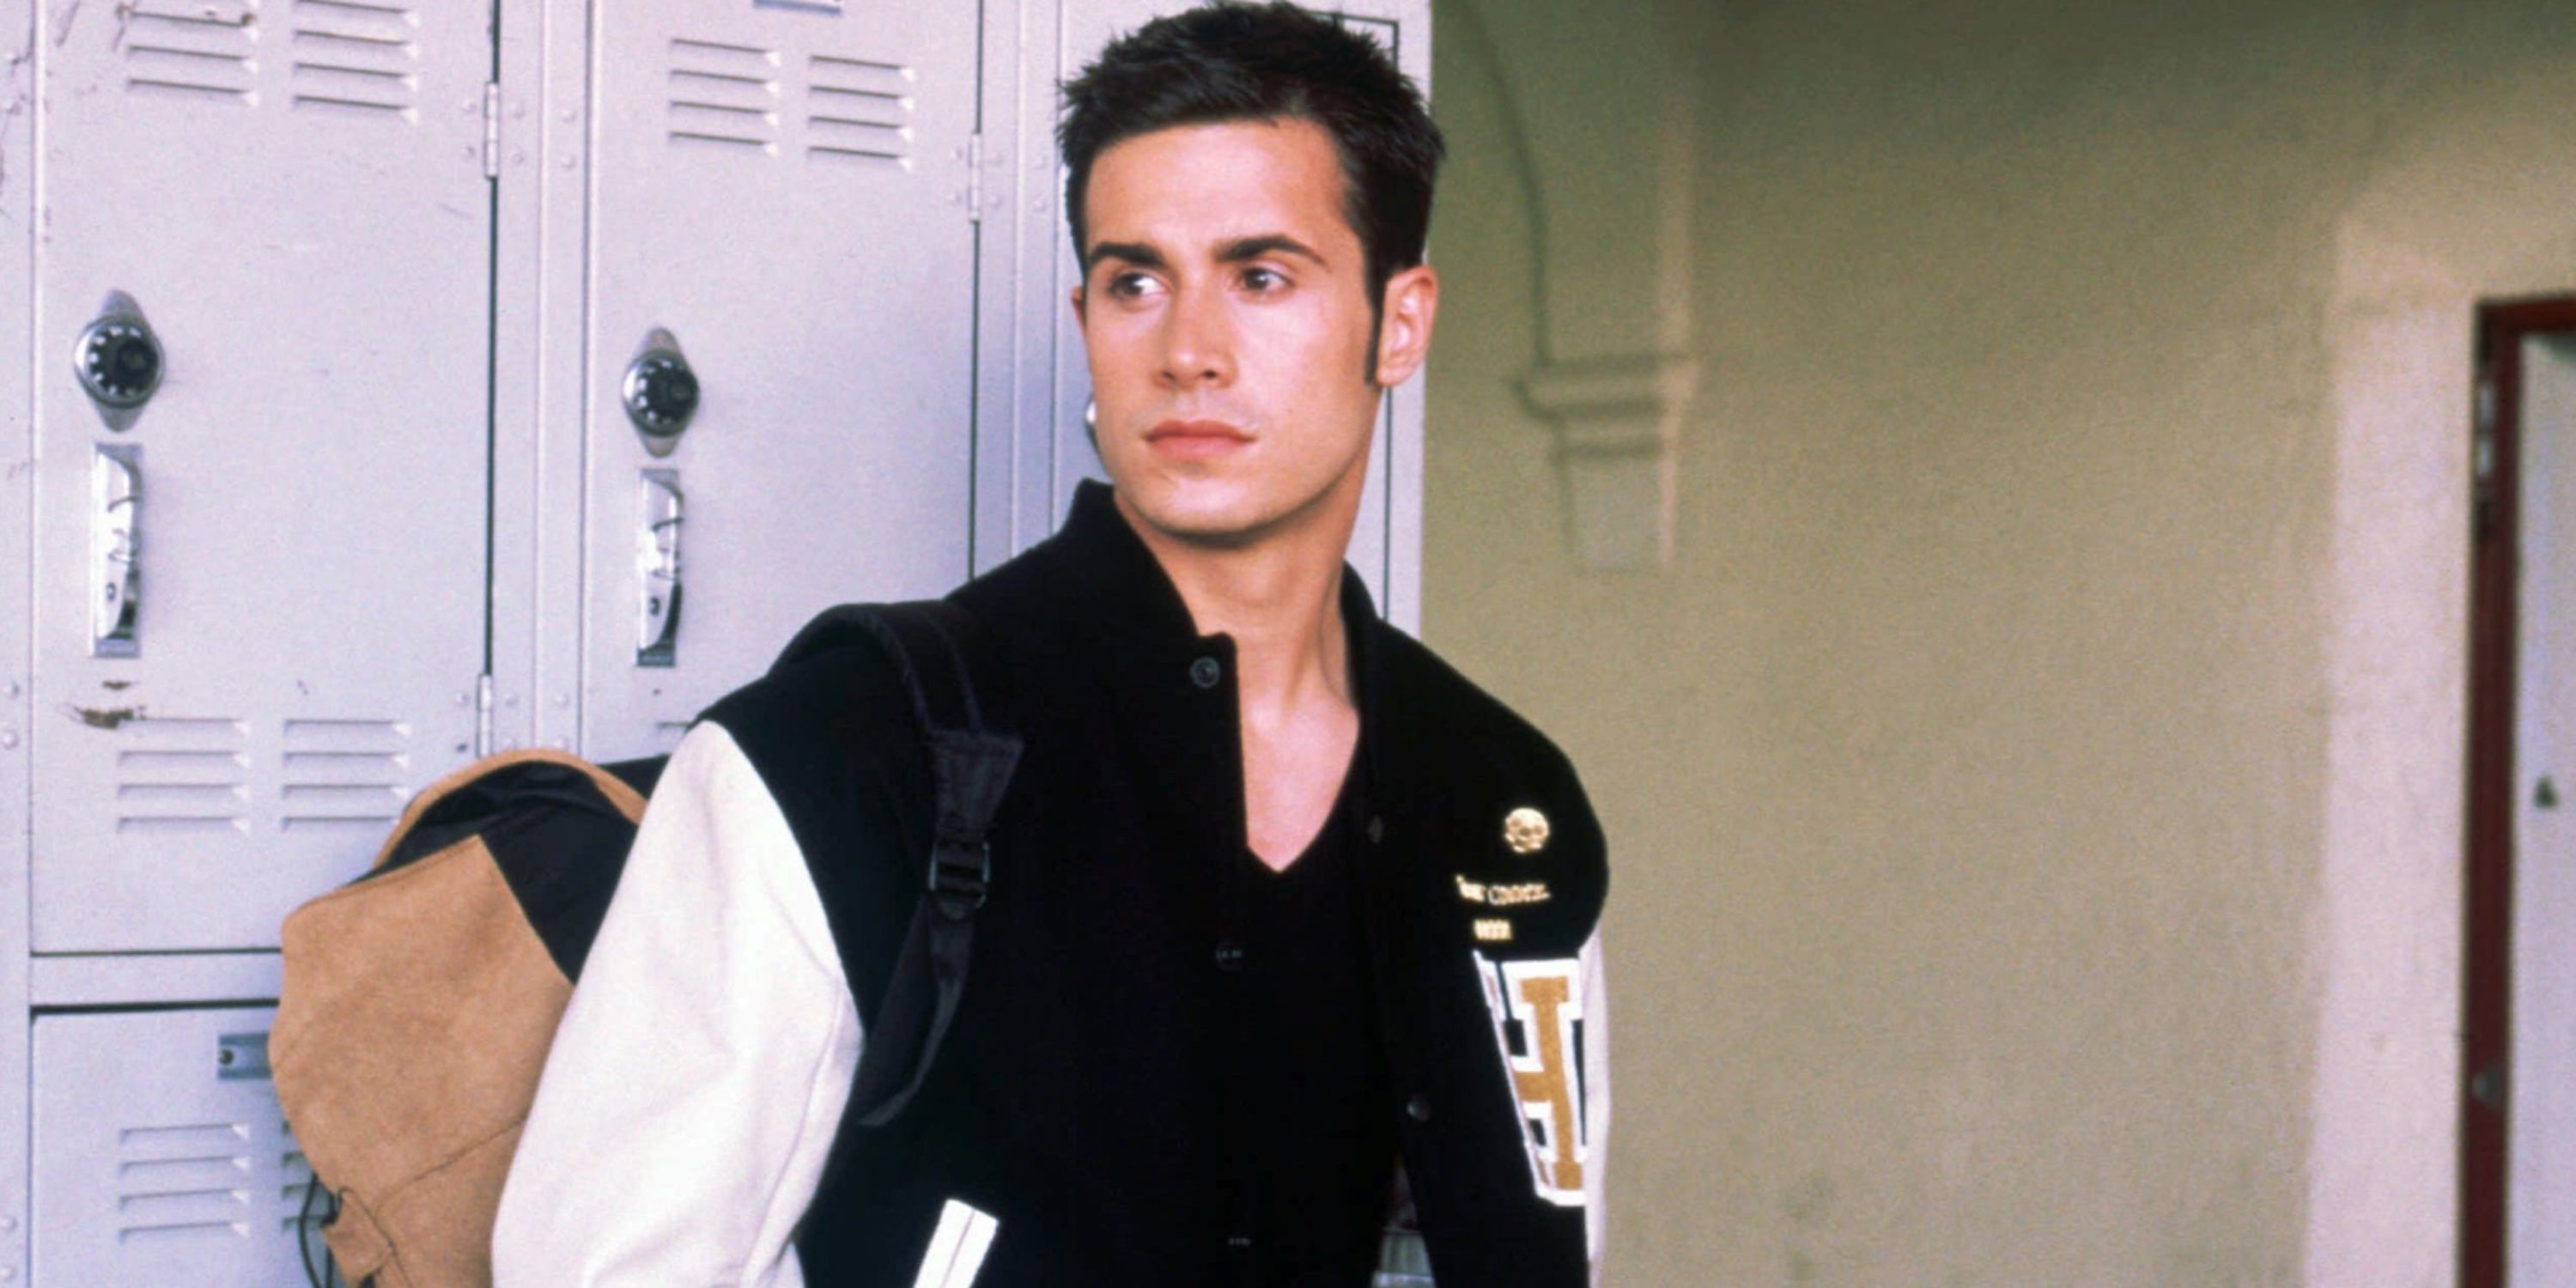 Zack at school in She's All That